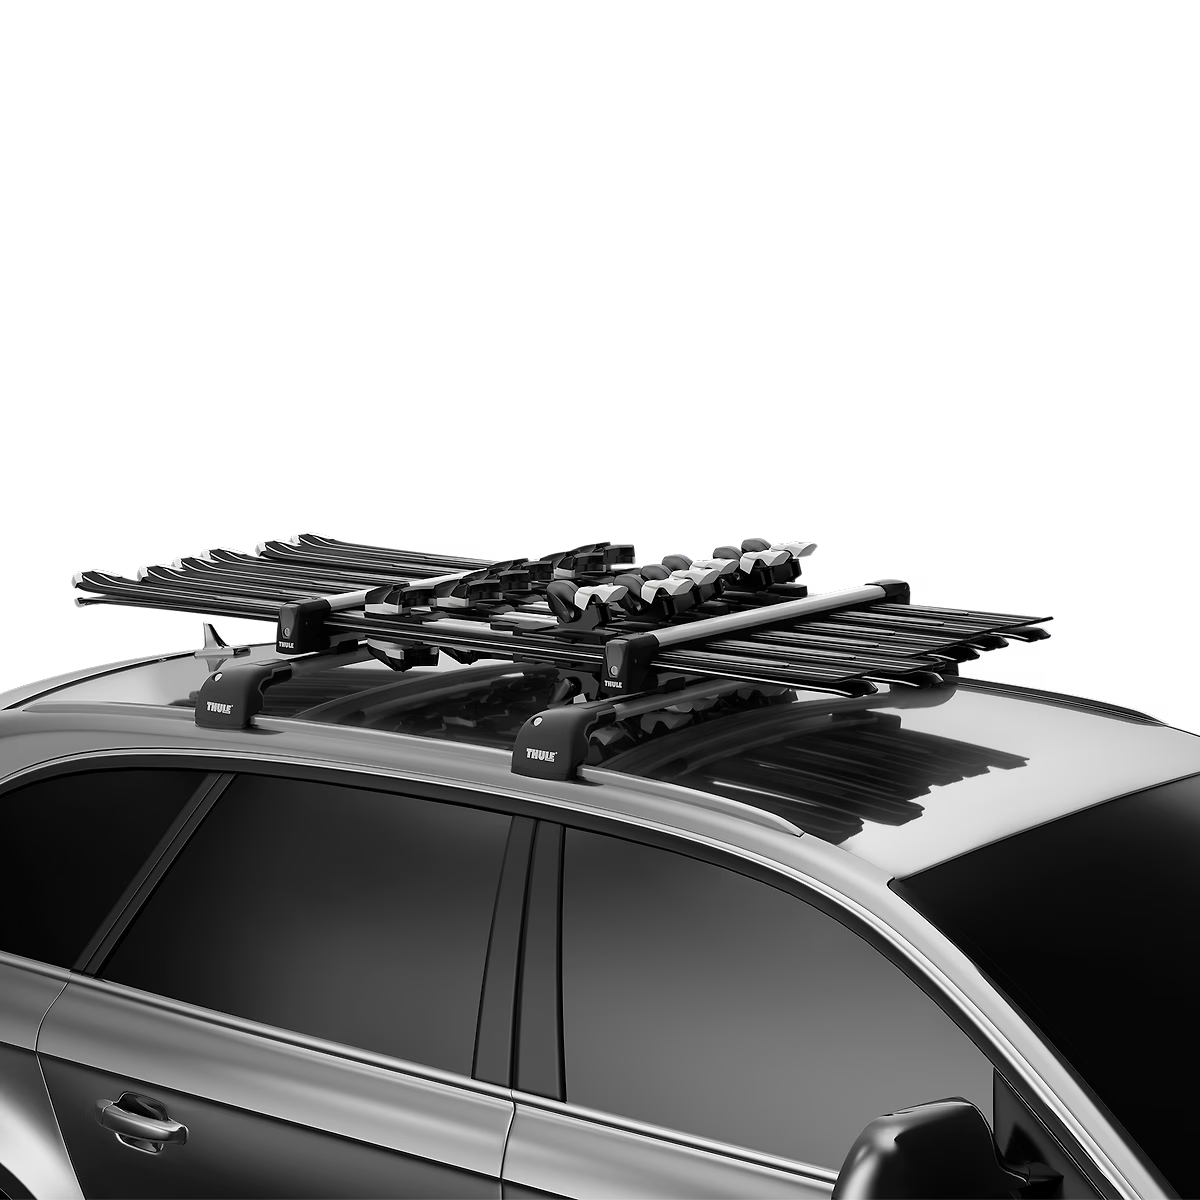 Roof Rack Accessory | Ski/Snowboard Carrier (Thule SnowPack L - 732615)